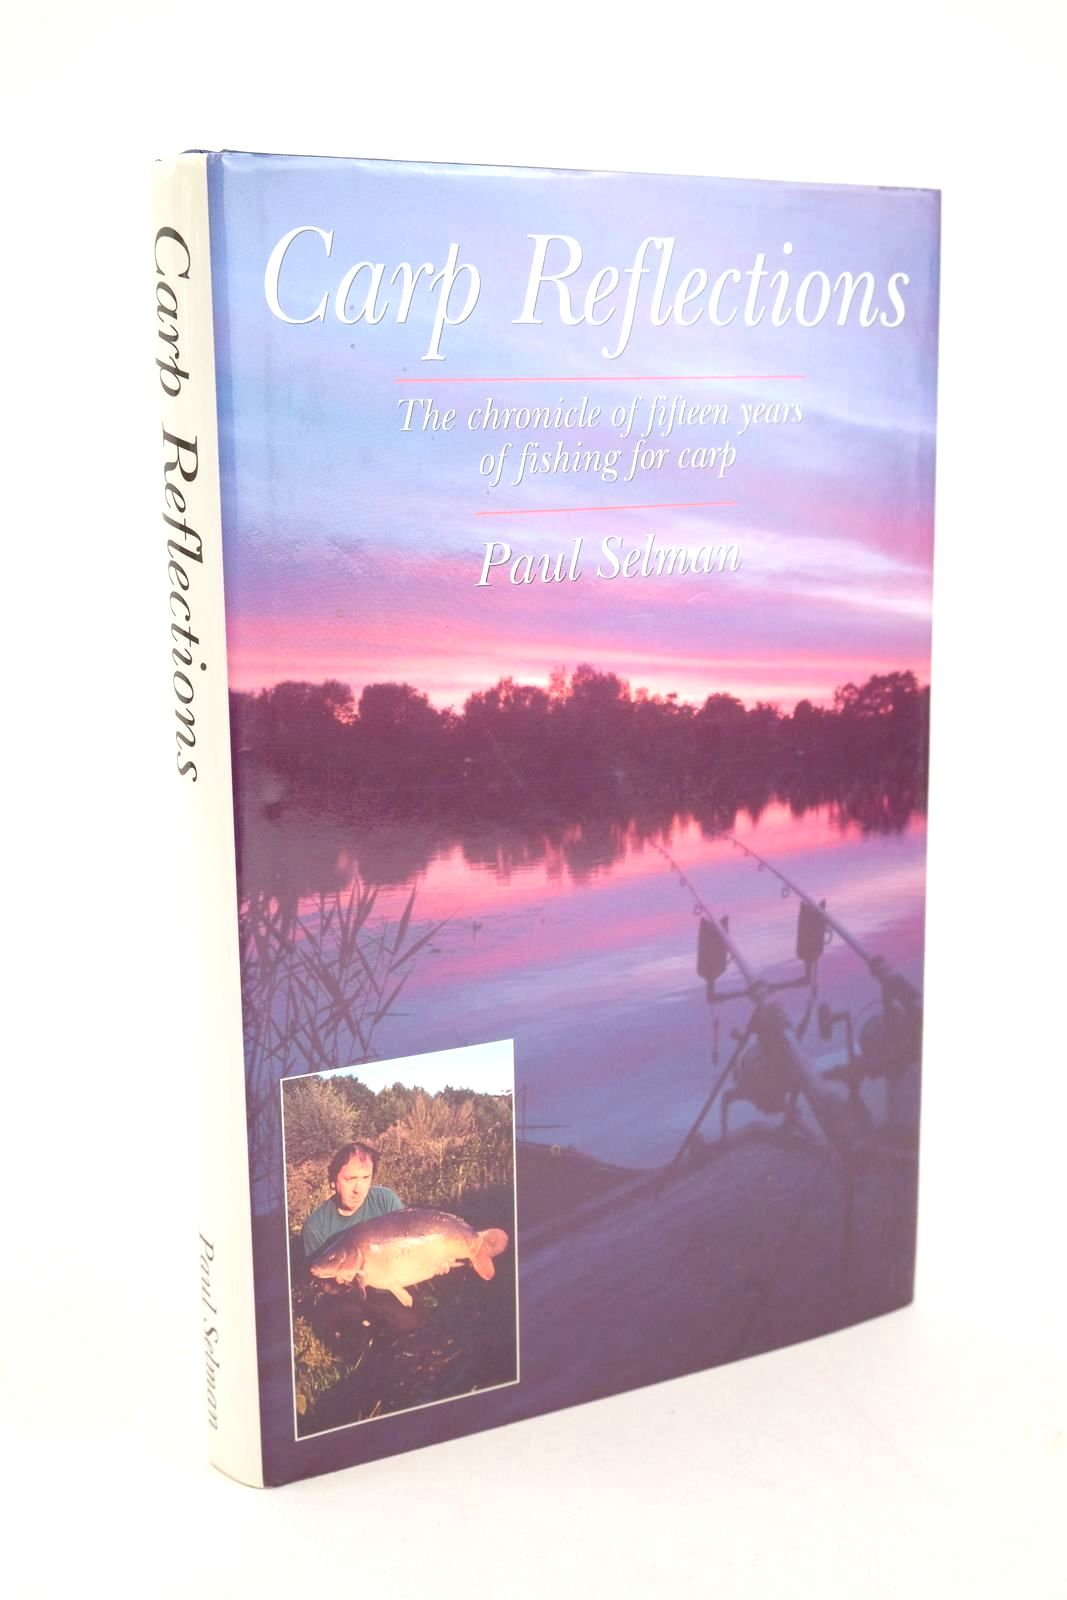 Photo of CARP REFLECTIONS written by Selman, Paul illustrated by Curtis, Peter published by Laneman Publishing (STOCK CODE: 1327660)  for sale by Stella & Rose's Books